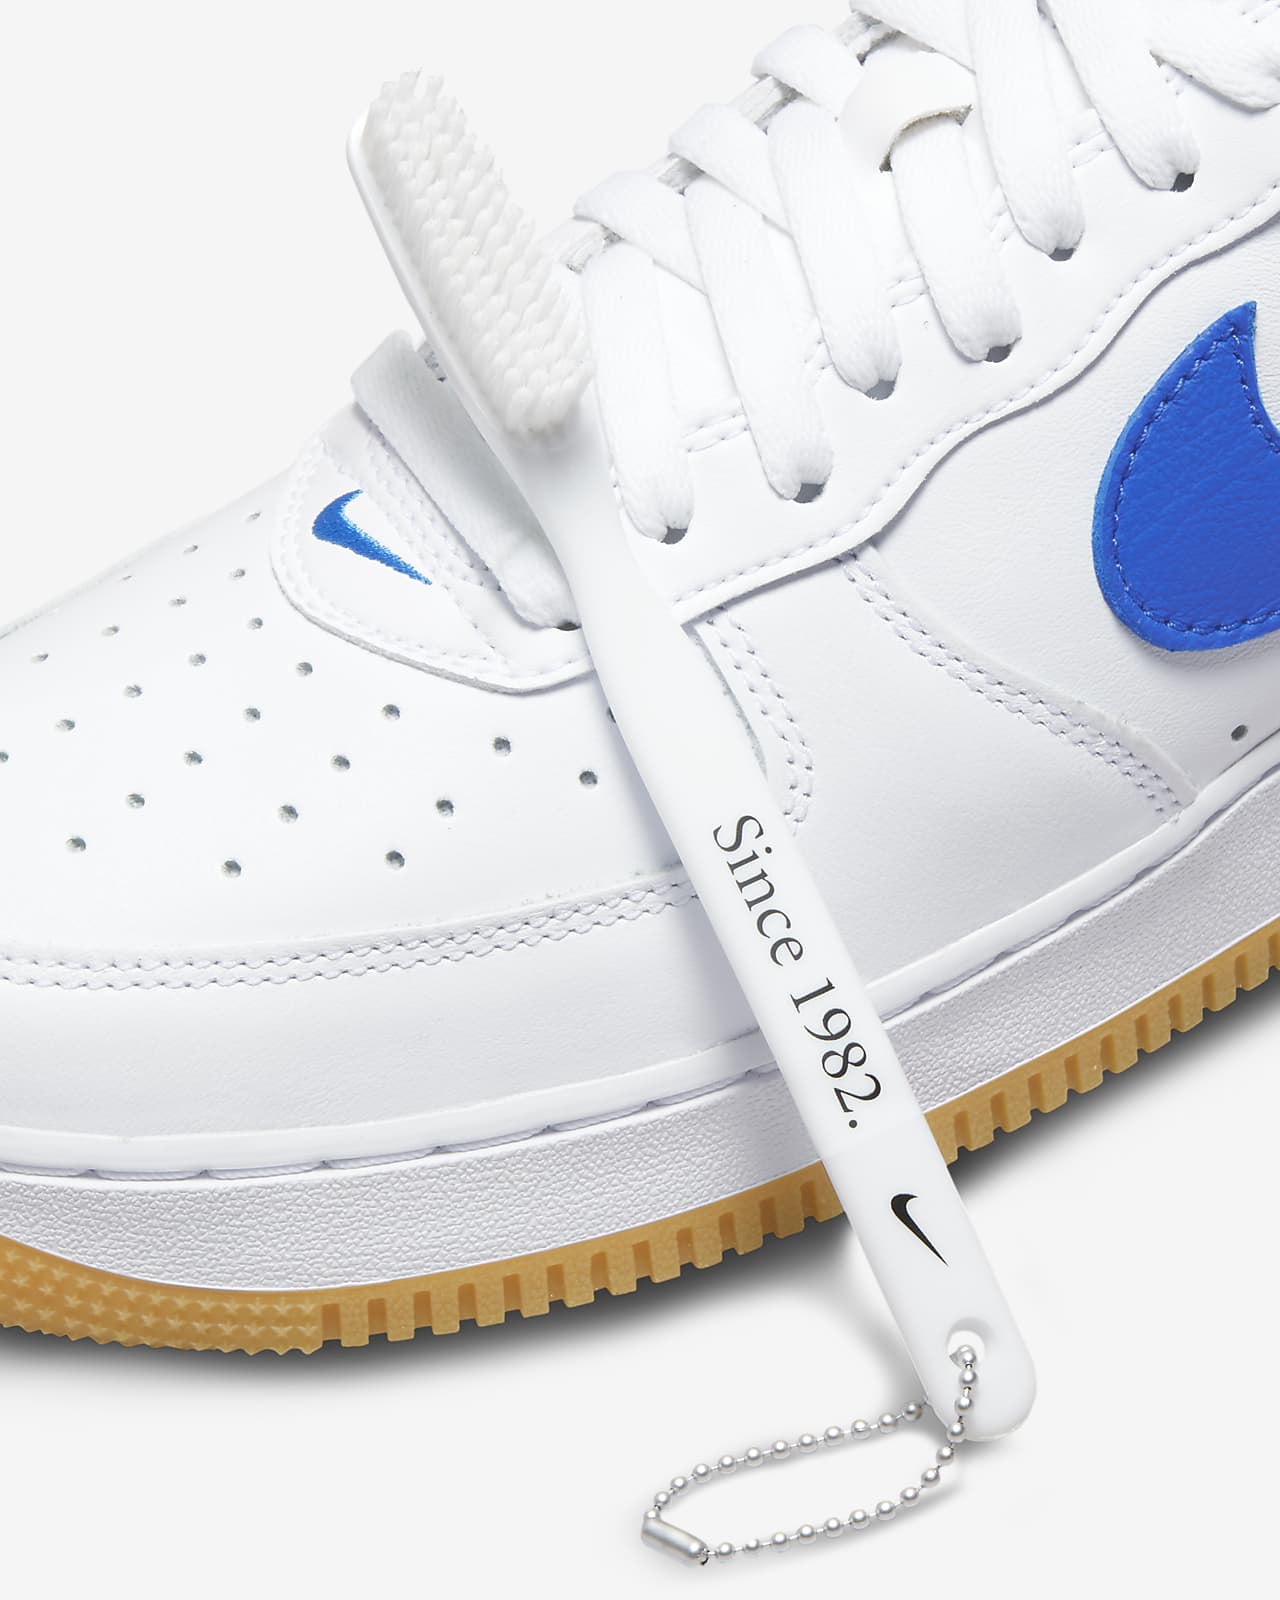 Nike Air Force 1 Sneakers With Swoosh And Gum Sole in Blue for Men